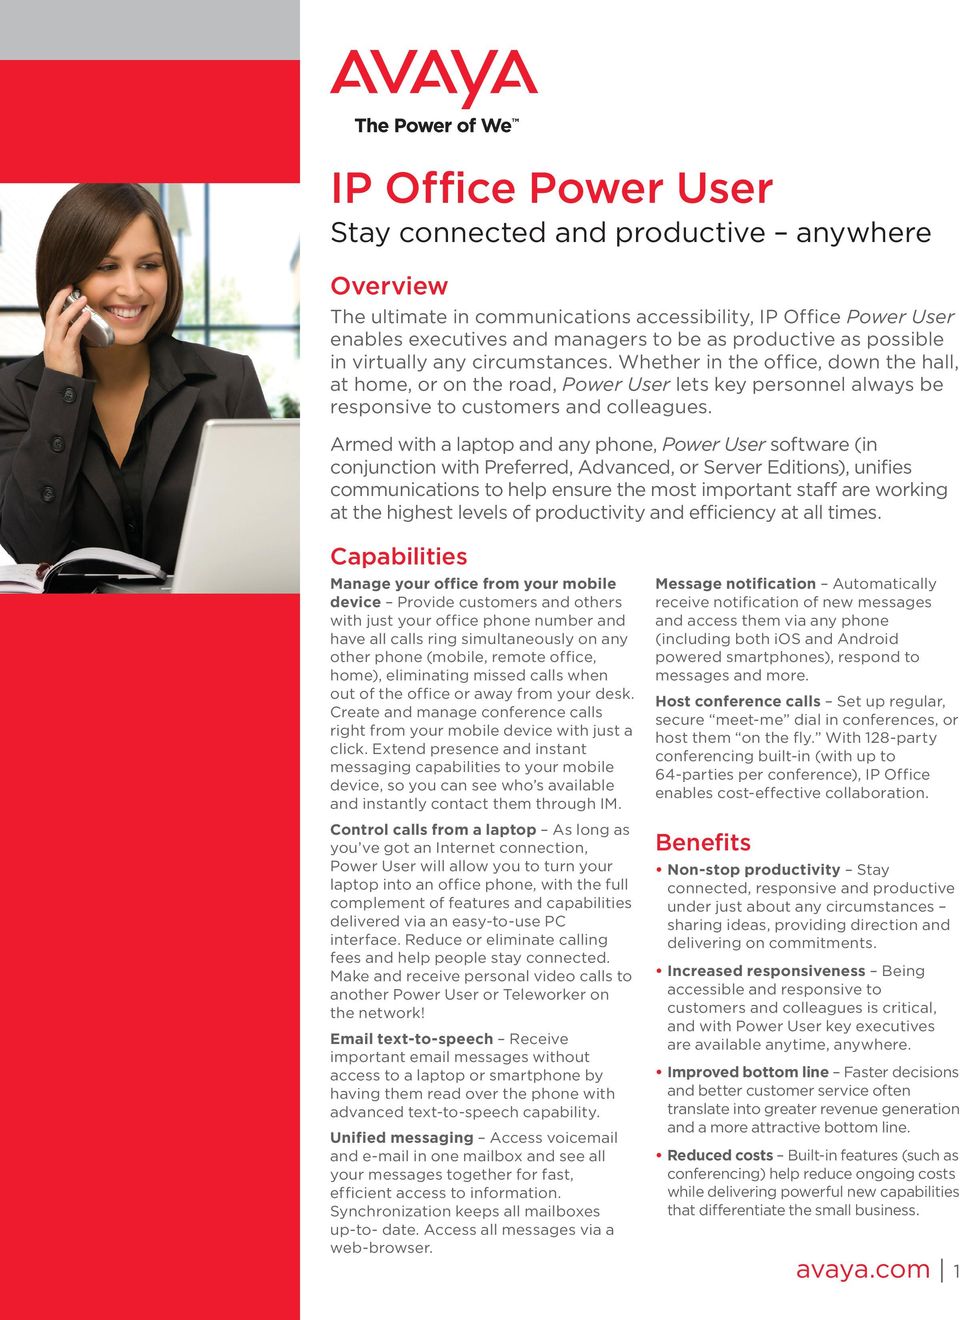 Armed with a laptop and any phone, Power User software (in conjunction with Preferred, Advanced, or Server Editions), unifies communications to help ensure the most important staff are working at the